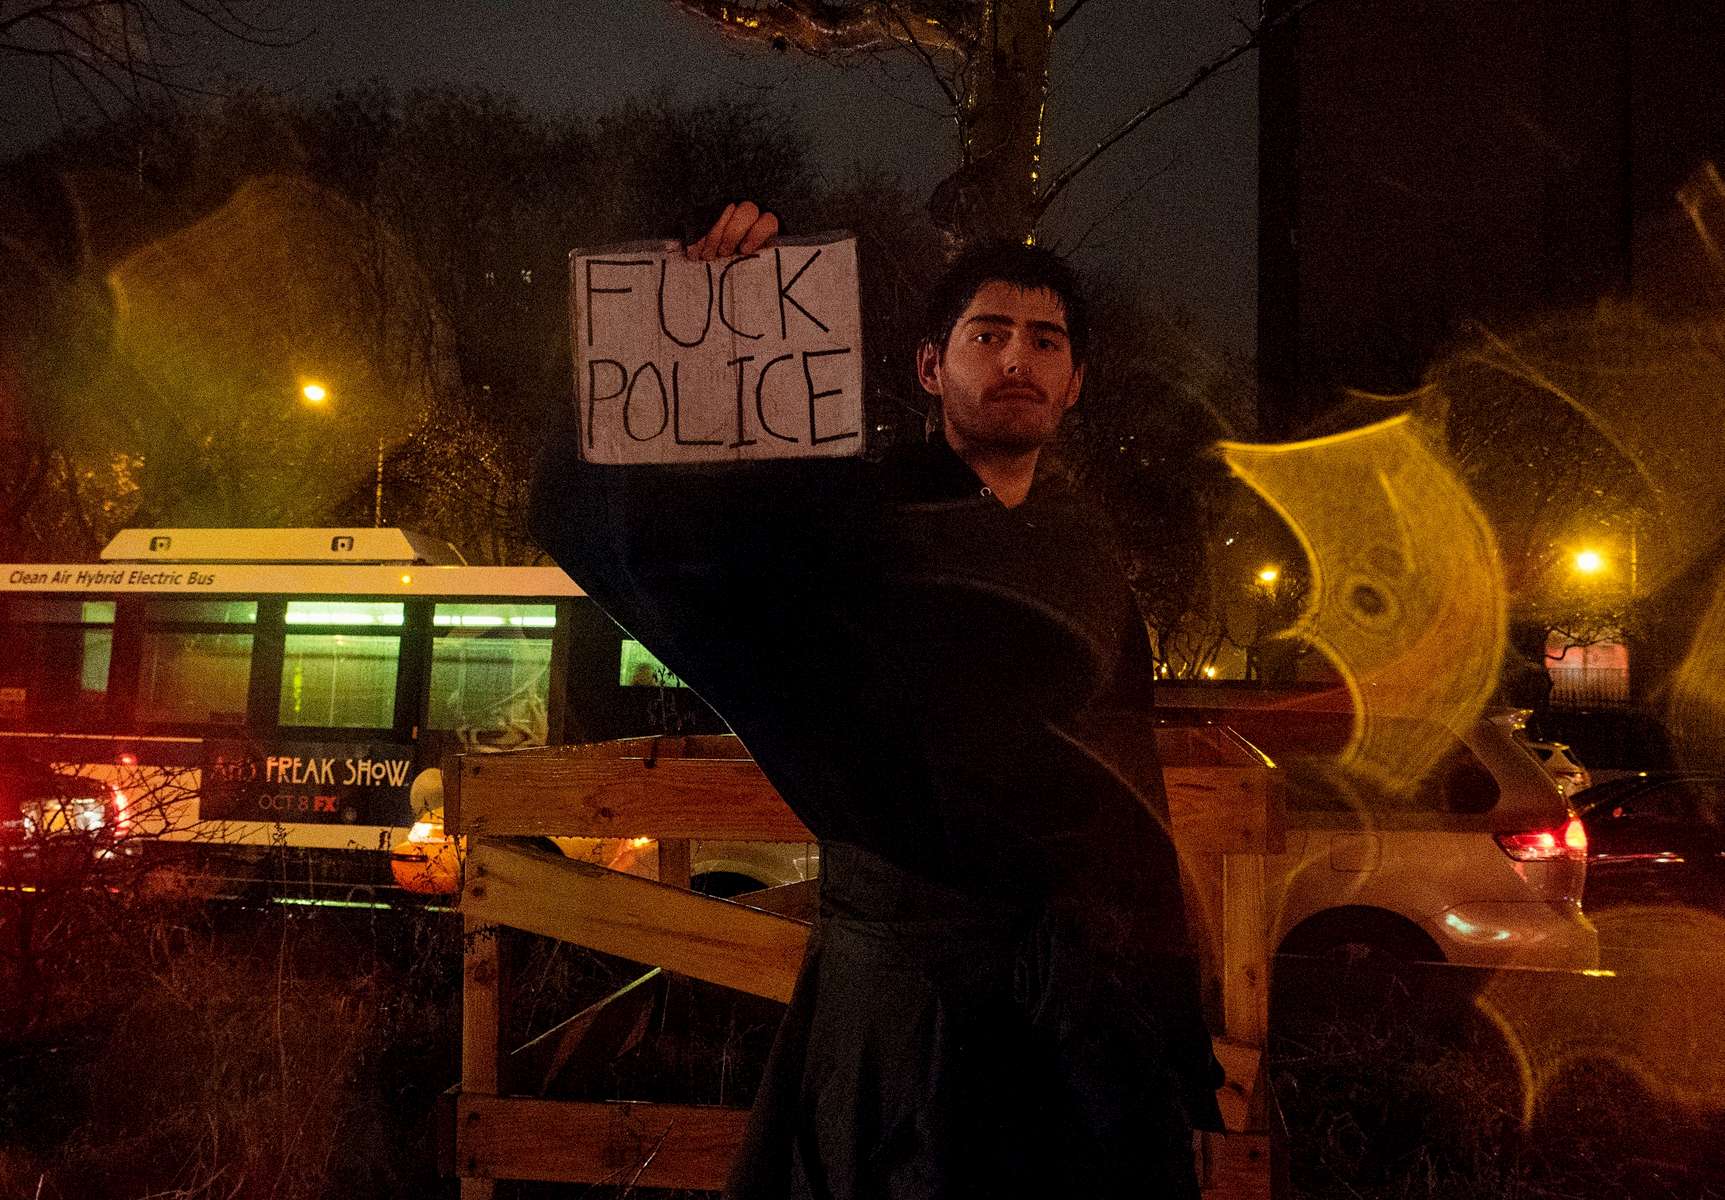 Fuck police |Legacy Series